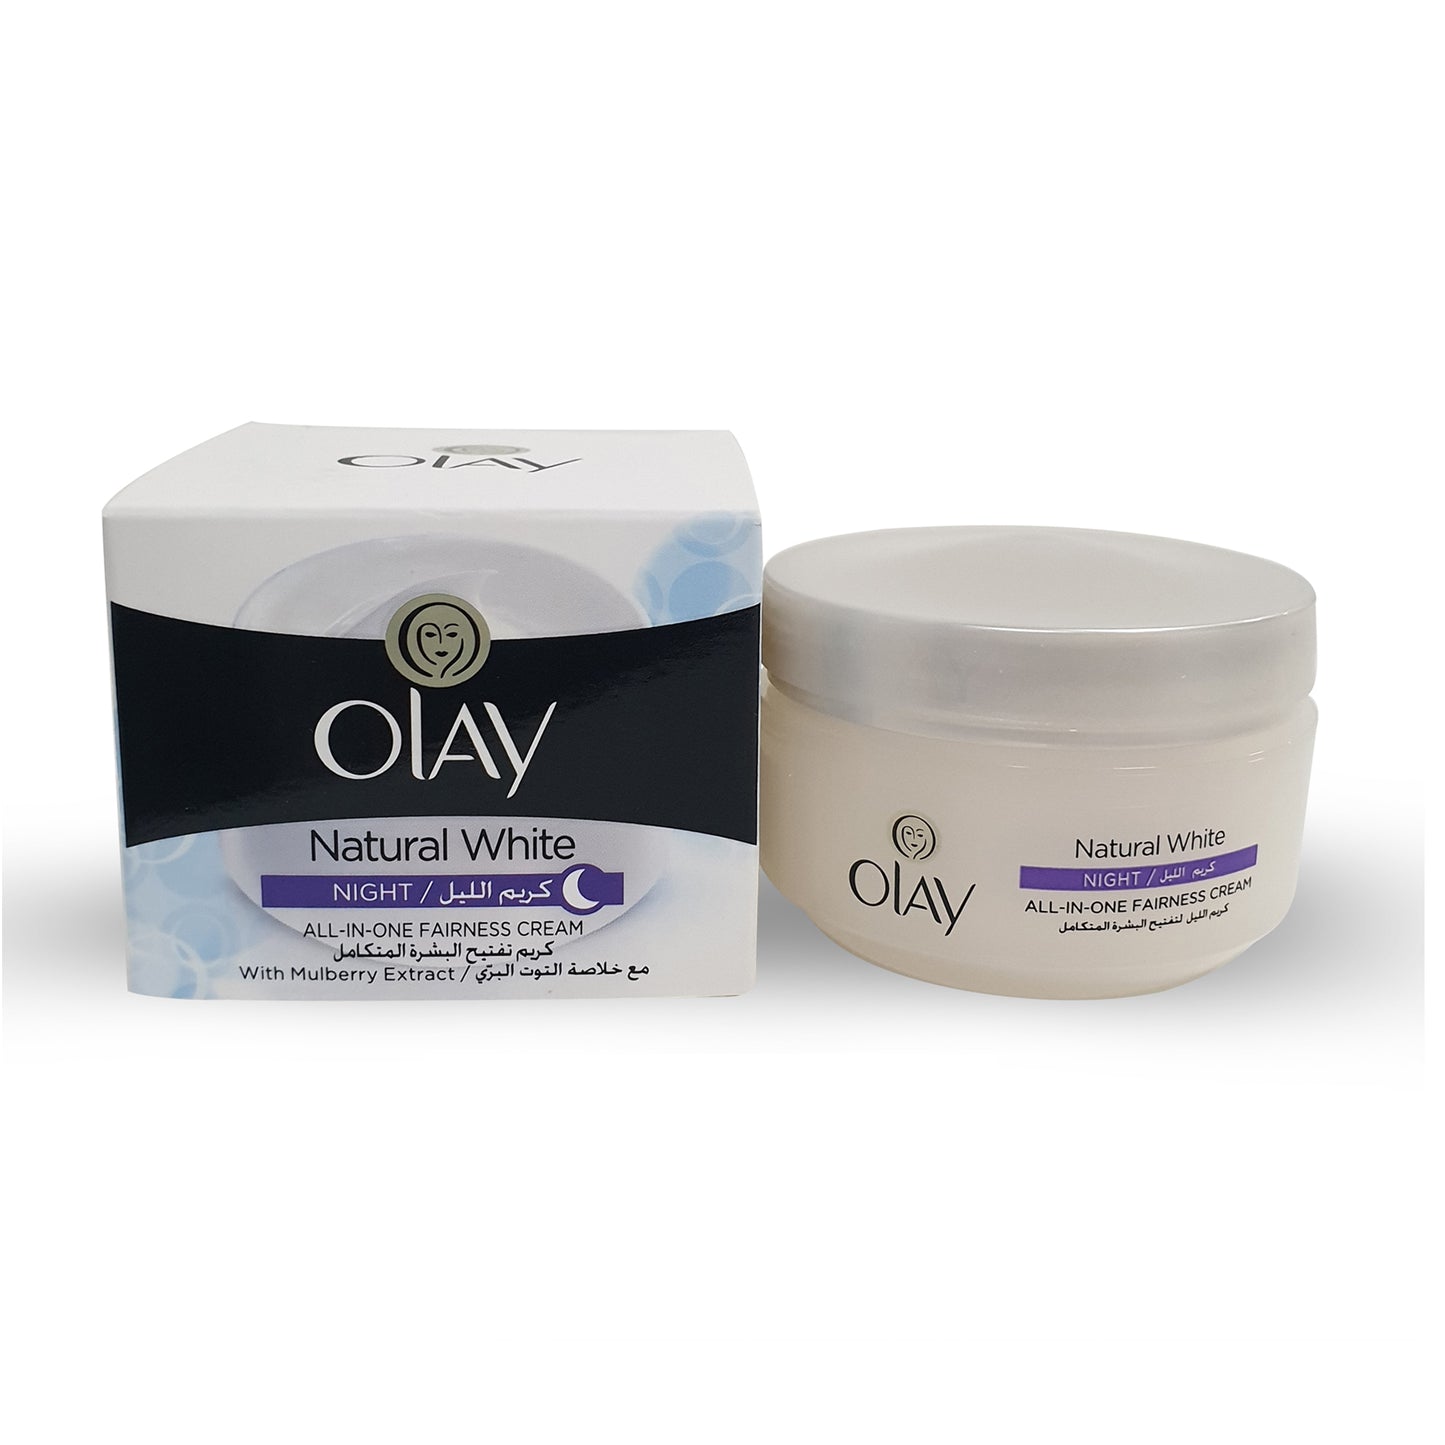 OLAY - NATURAL WHITE ALL IN ONE FAIRNESS NIGHT CREAM WITH MULBERRY EXTRACT - 50G